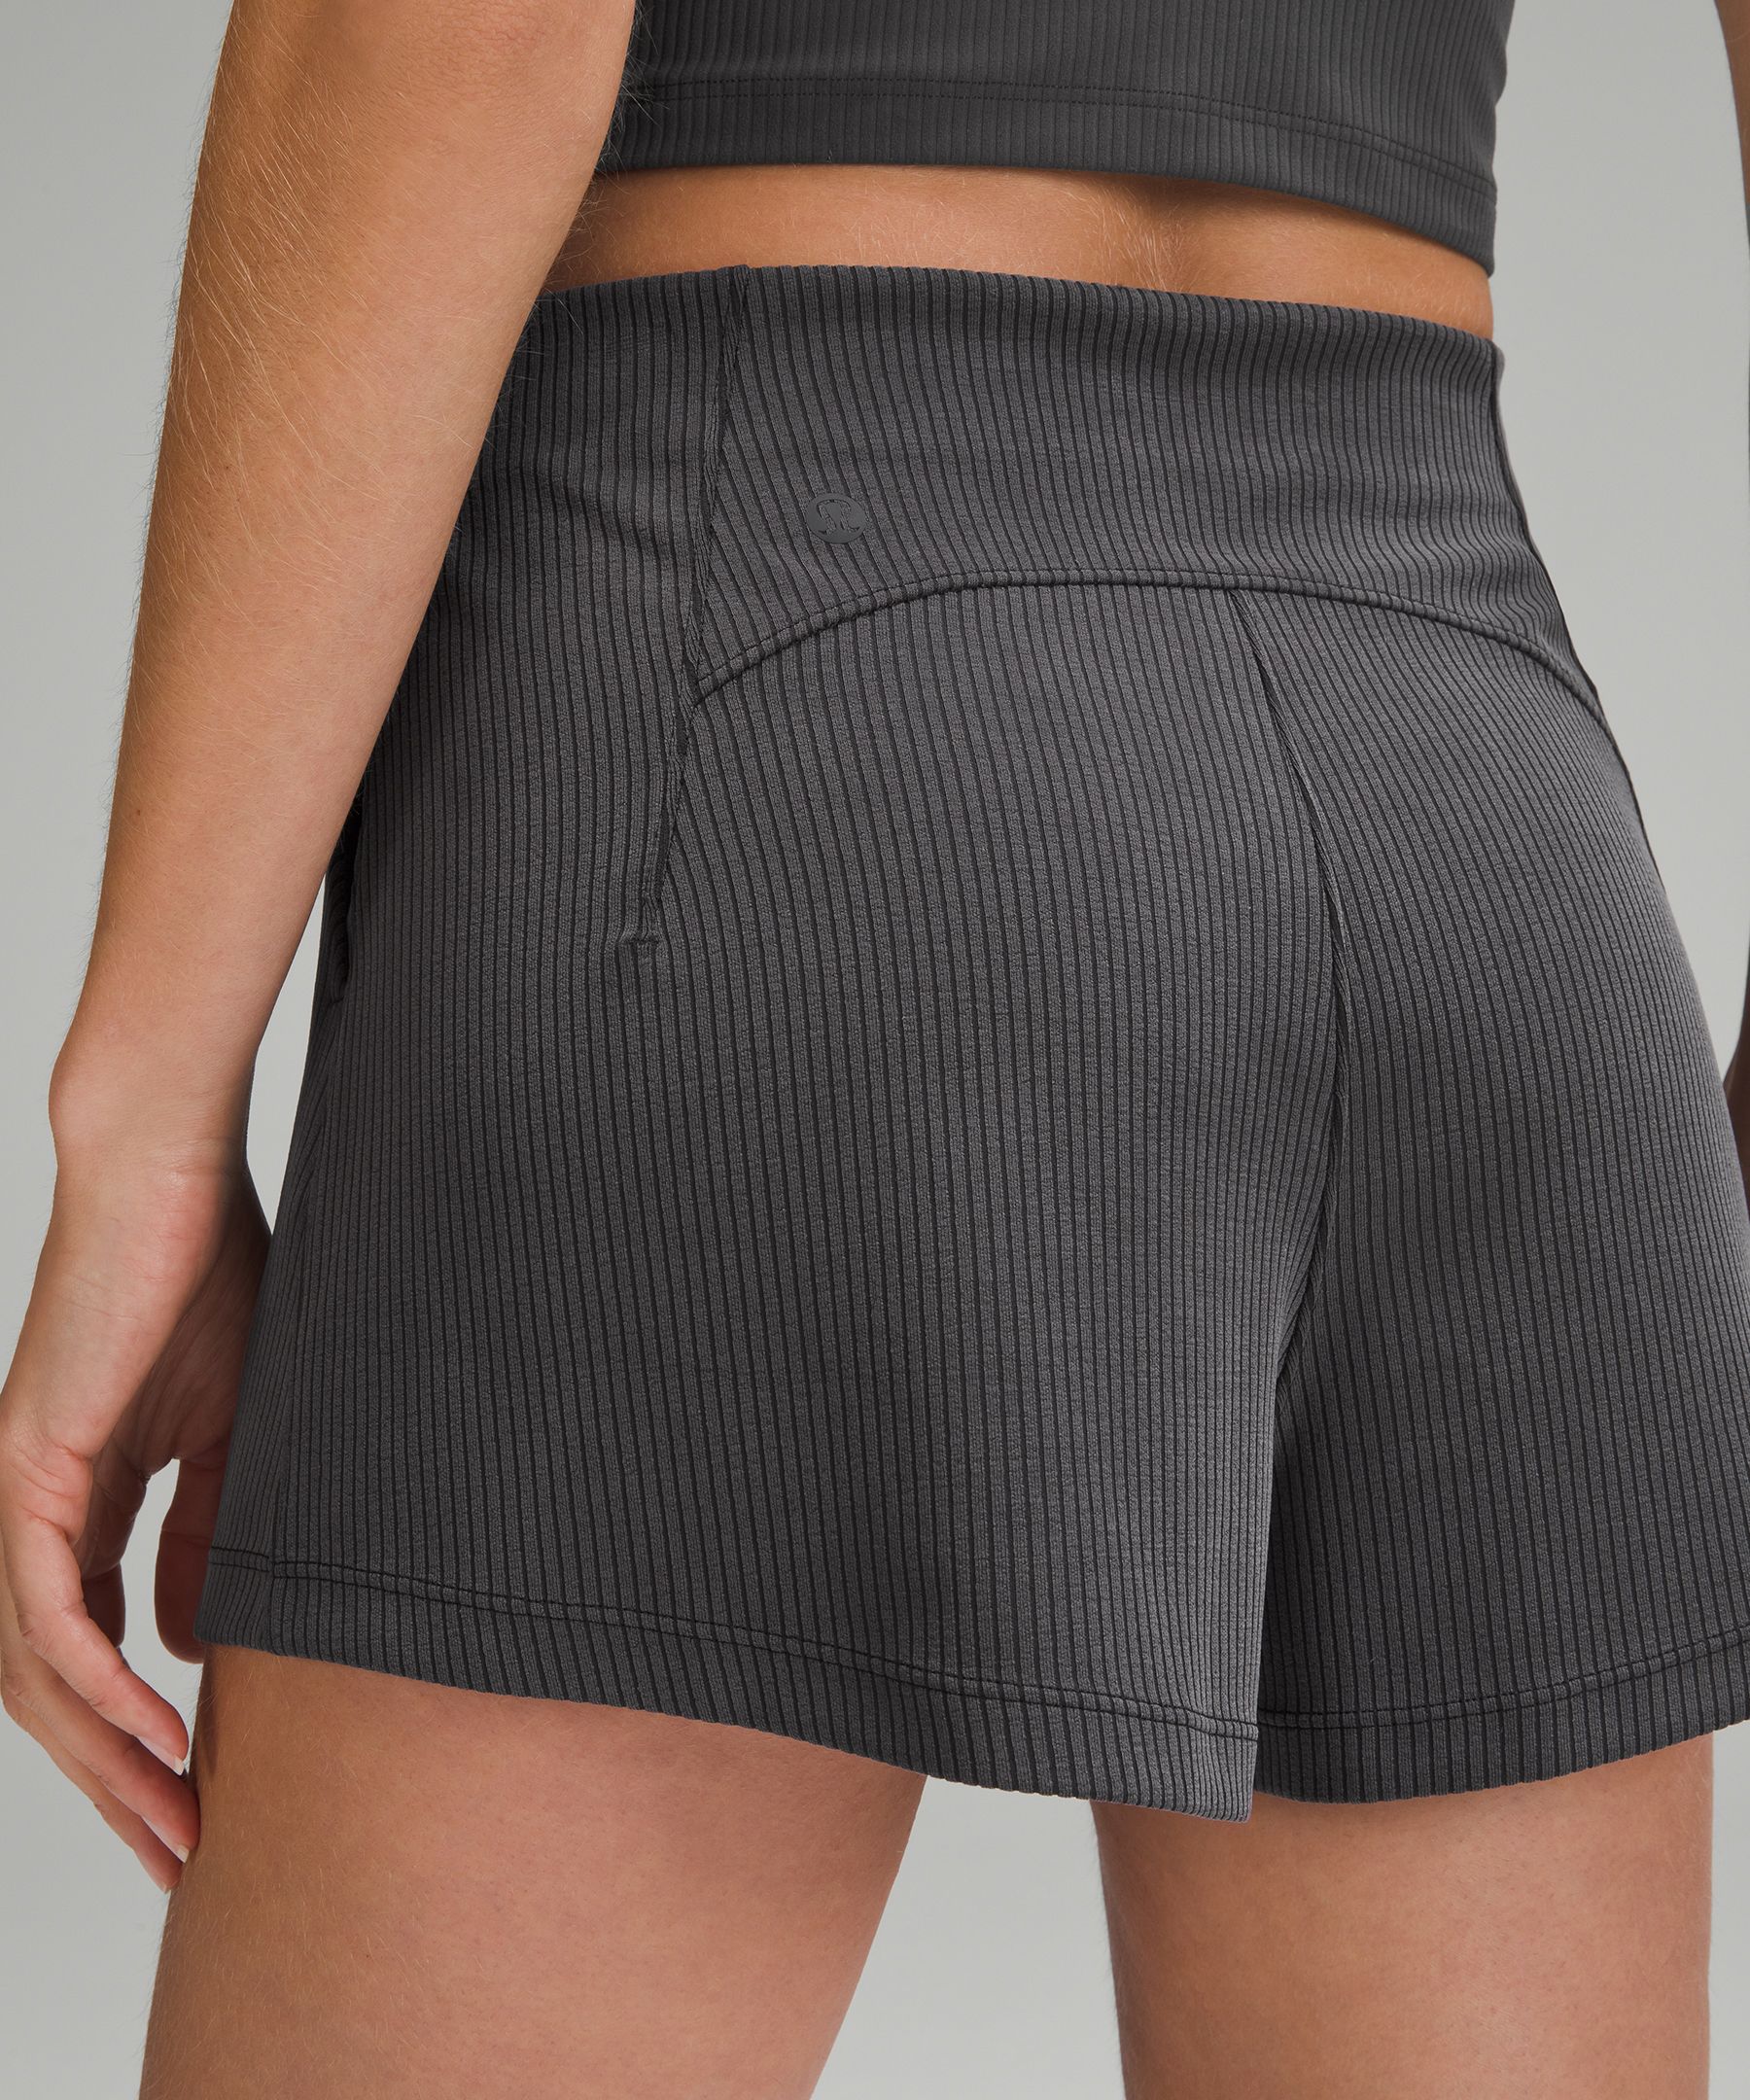 Fit pic of the Ribbed Contoured HR Short for my thick thigh girls. These  are squeezy 😔 : r/lululemon